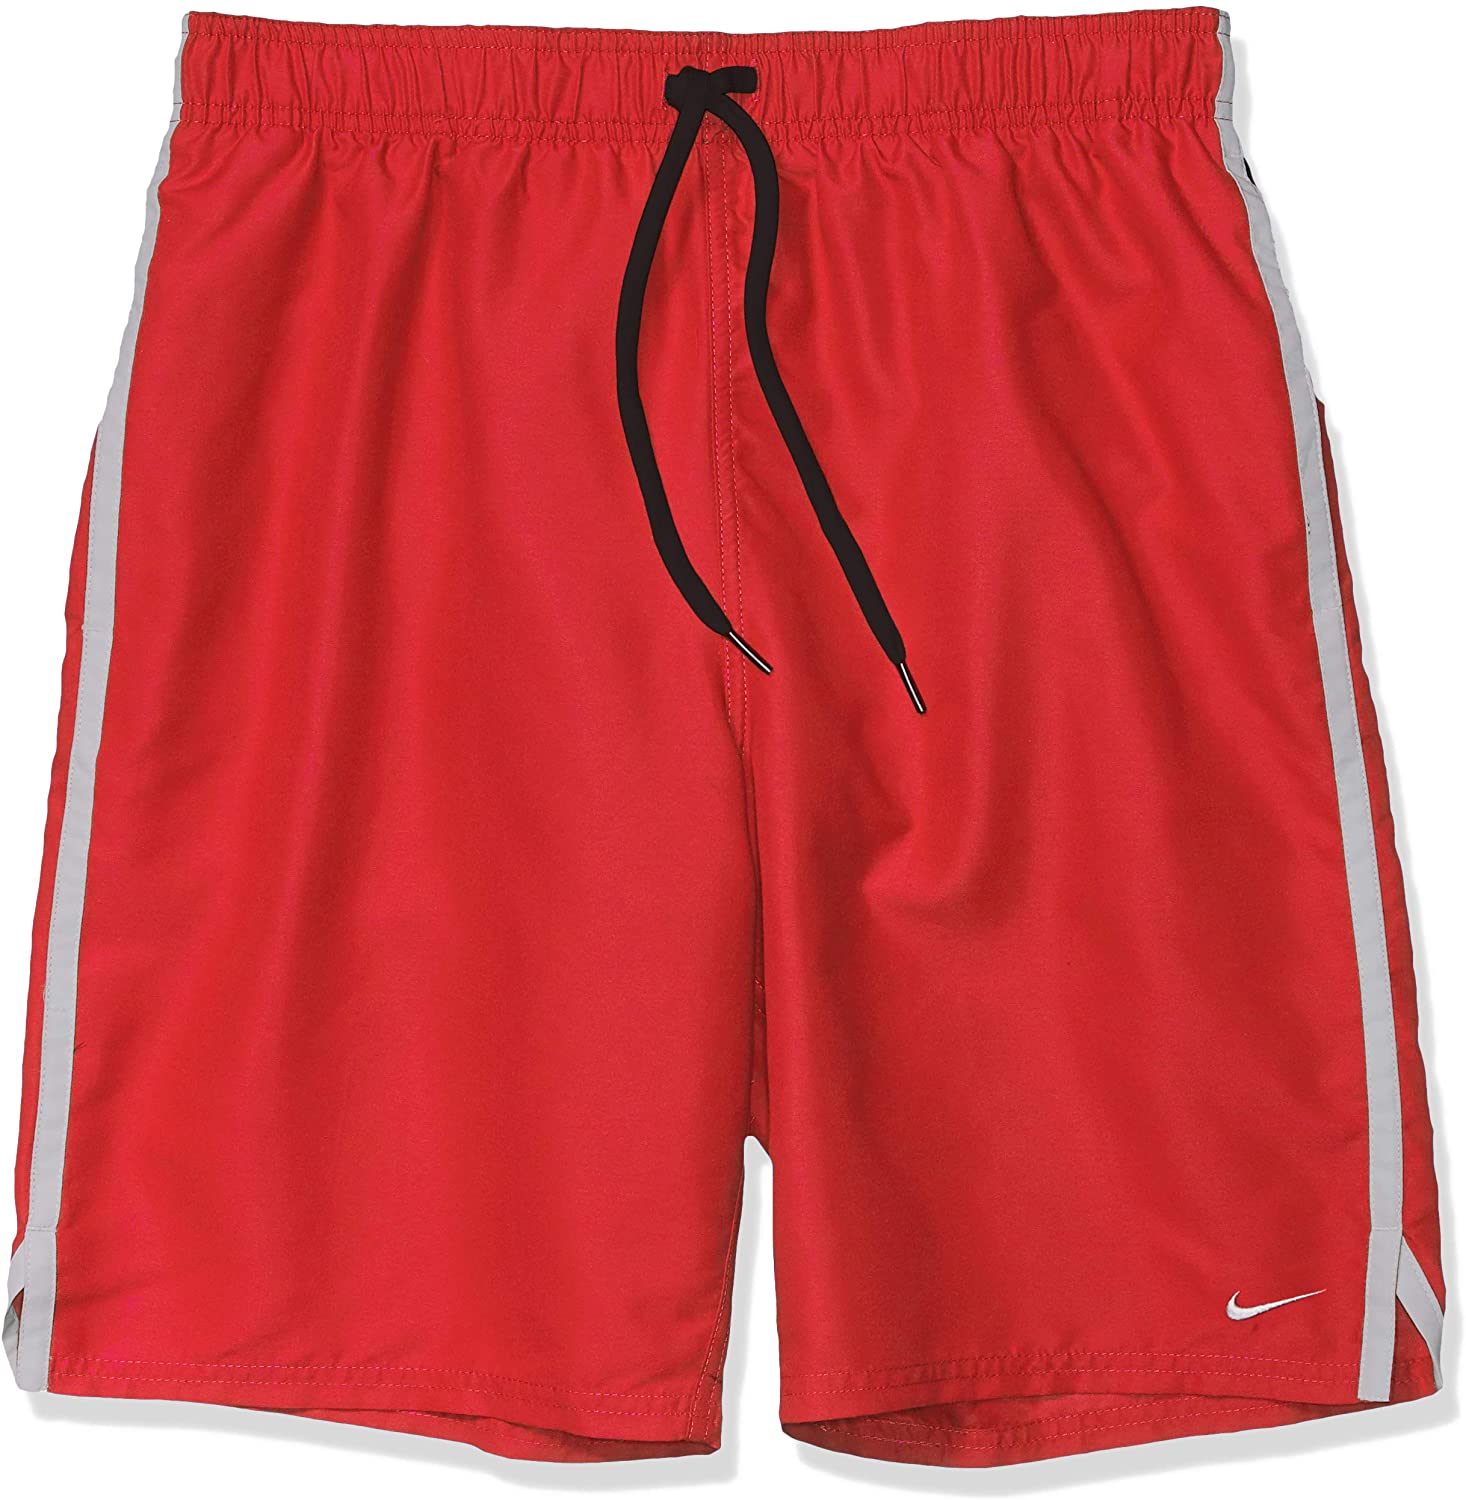 Men's Nike Diverge 9" Volley Short Swim Trunk in University Red color from the front